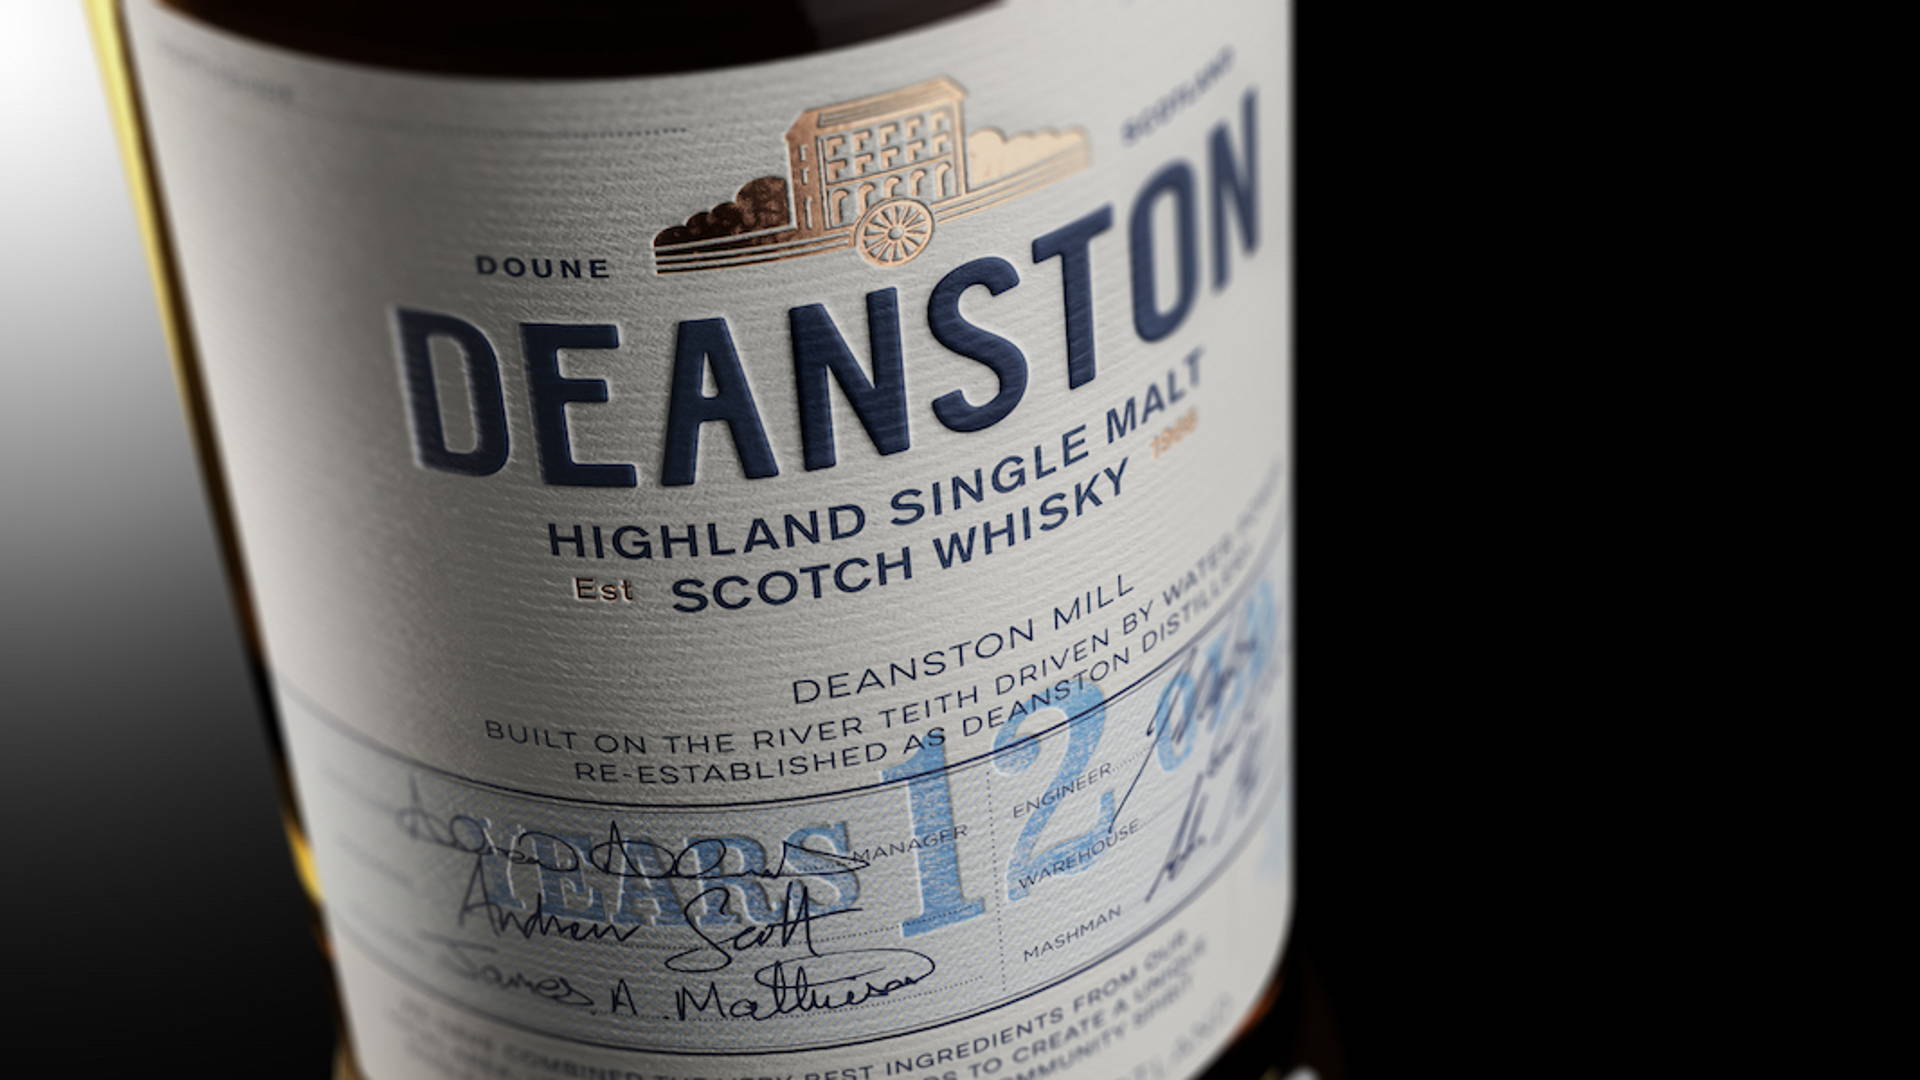 Featured image for Deanston Highland Single Malt Scotch Whisky